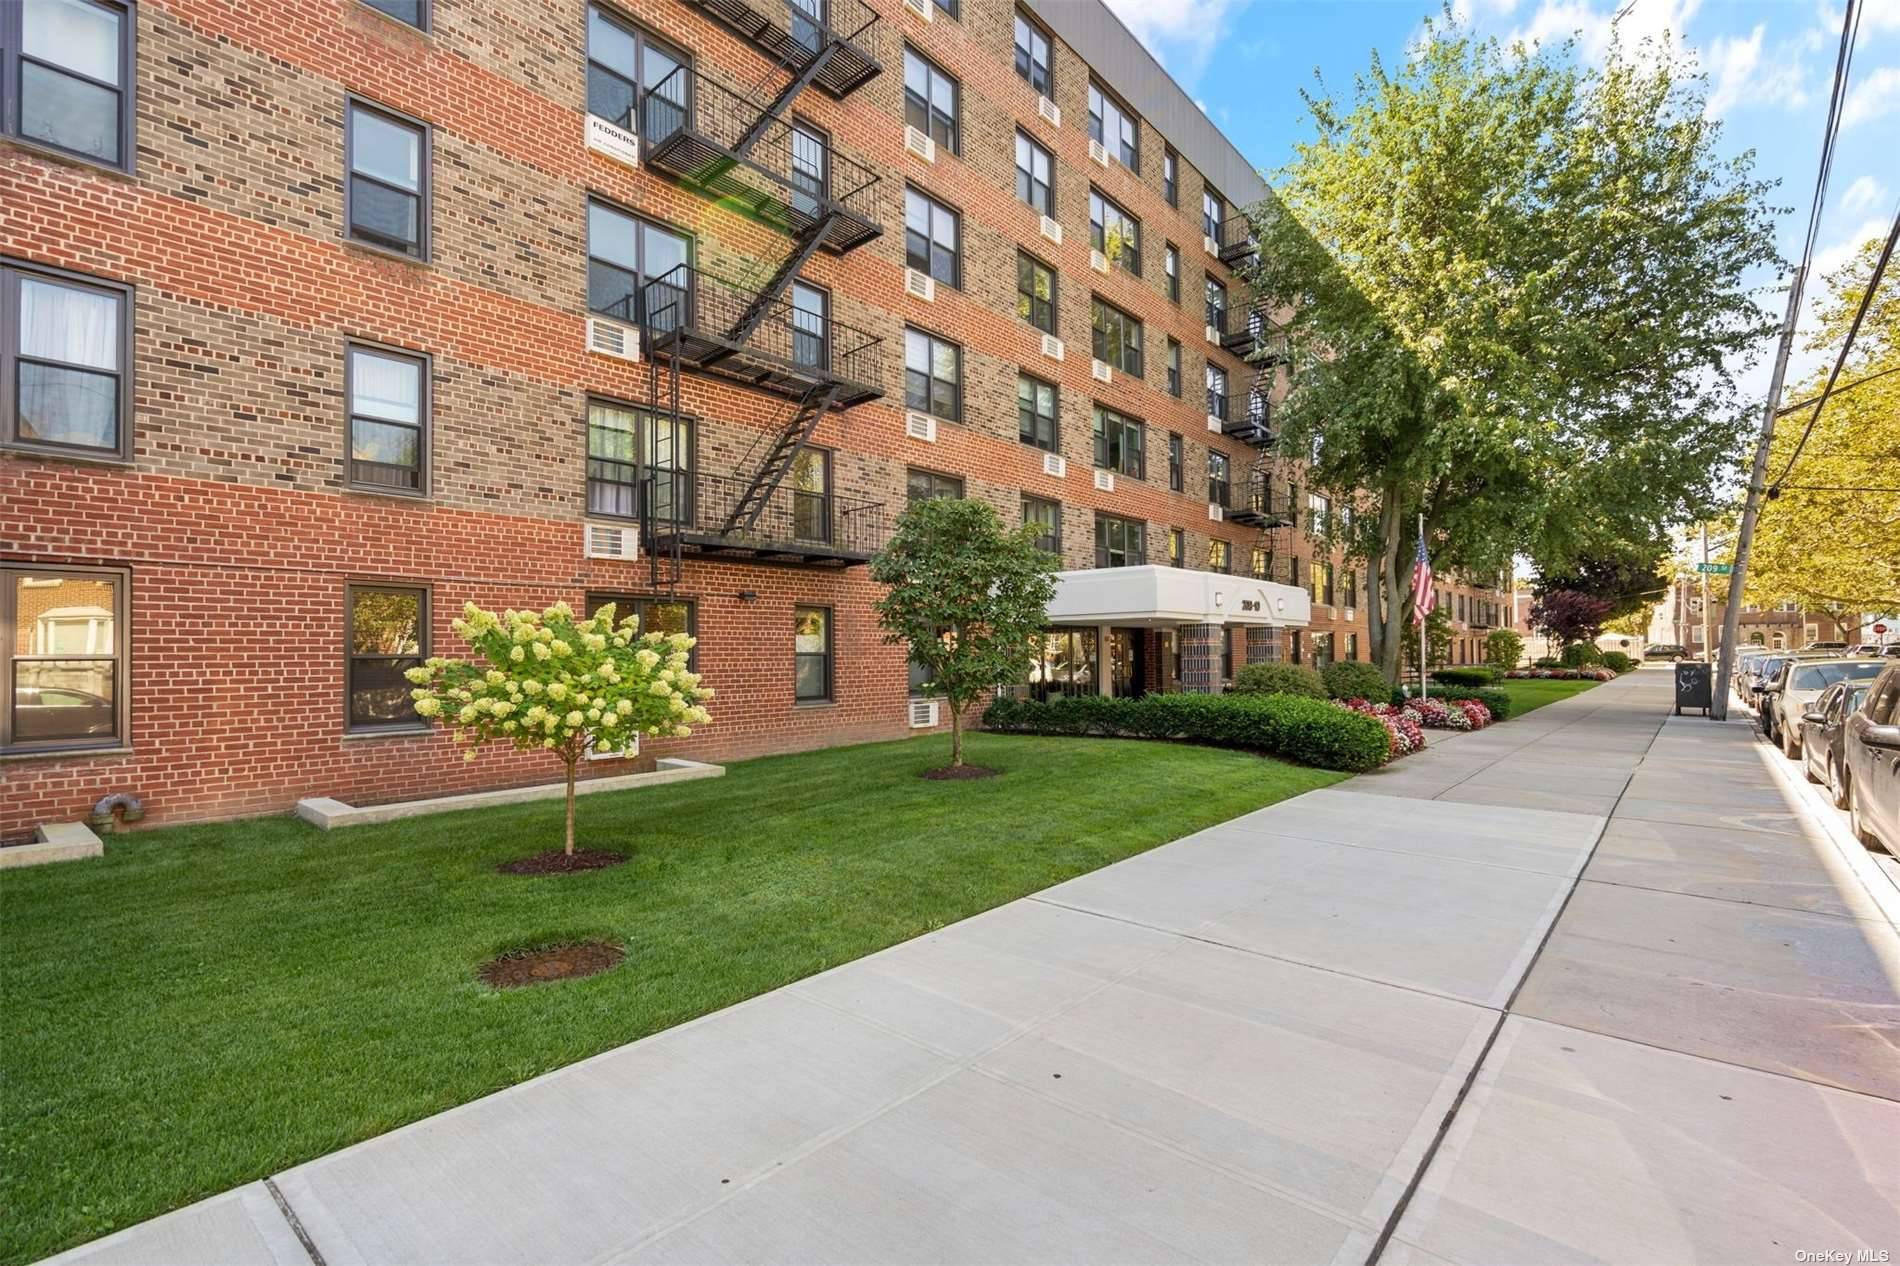 Welcome to this charming 1 bedroom, 1 bathroom Co op located in at The Linda Cooperative Building in Bayside, Queens, NY.